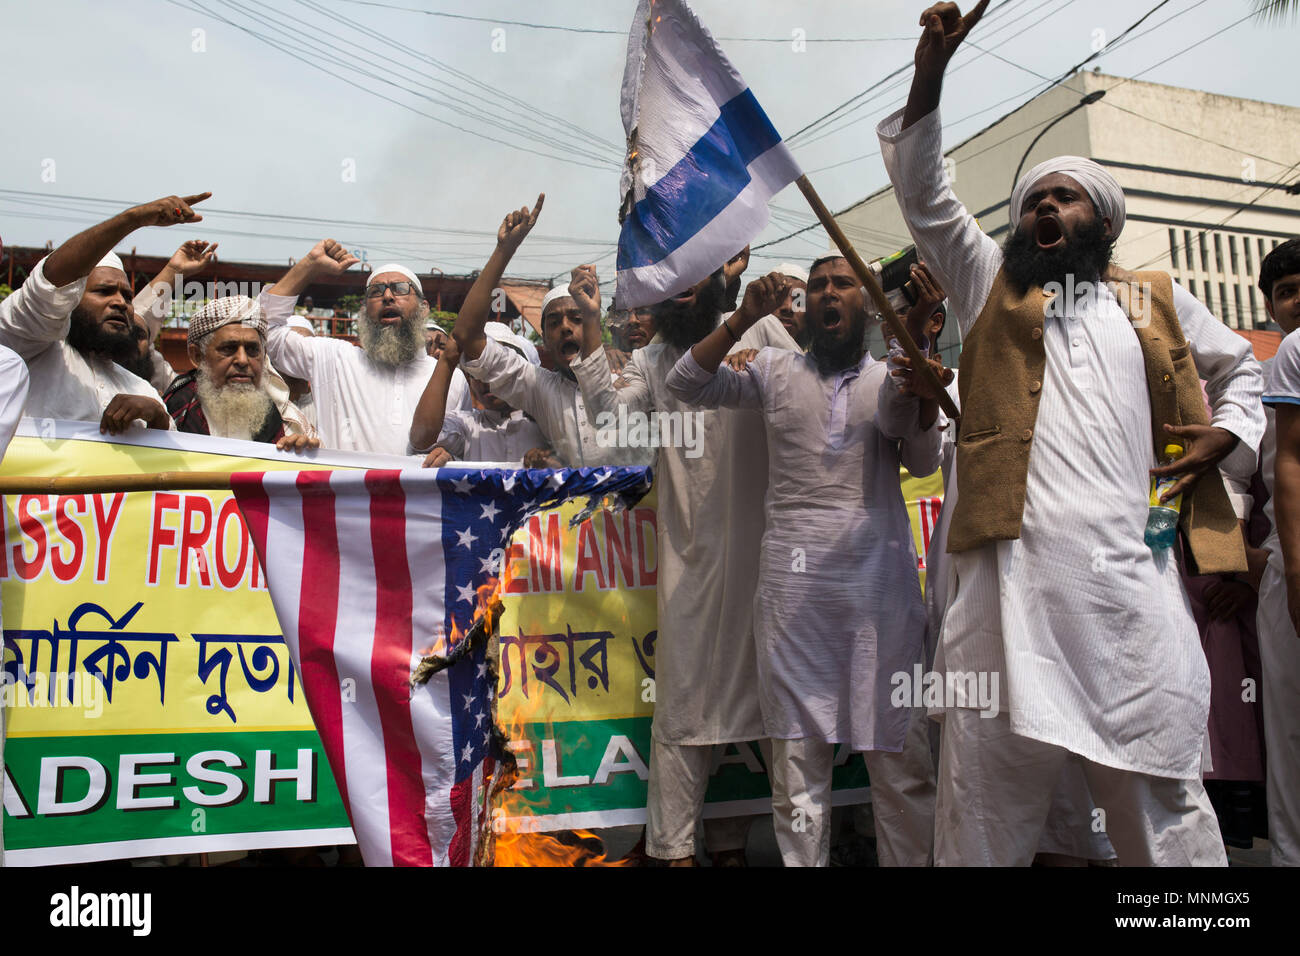 DHAKA, BANGLADESH - MAY 18 : Bangladeshi muslims burn flags of Israel and the U.S. in a protest against recent violence in Palestine, after Friday prayer outside the Baitul Muqarram national mosque in Dhaka, Bangladesh on May 18, 2018. Credit: zakir hossain chowdhury zakir/Alamy Live News Stock Photo